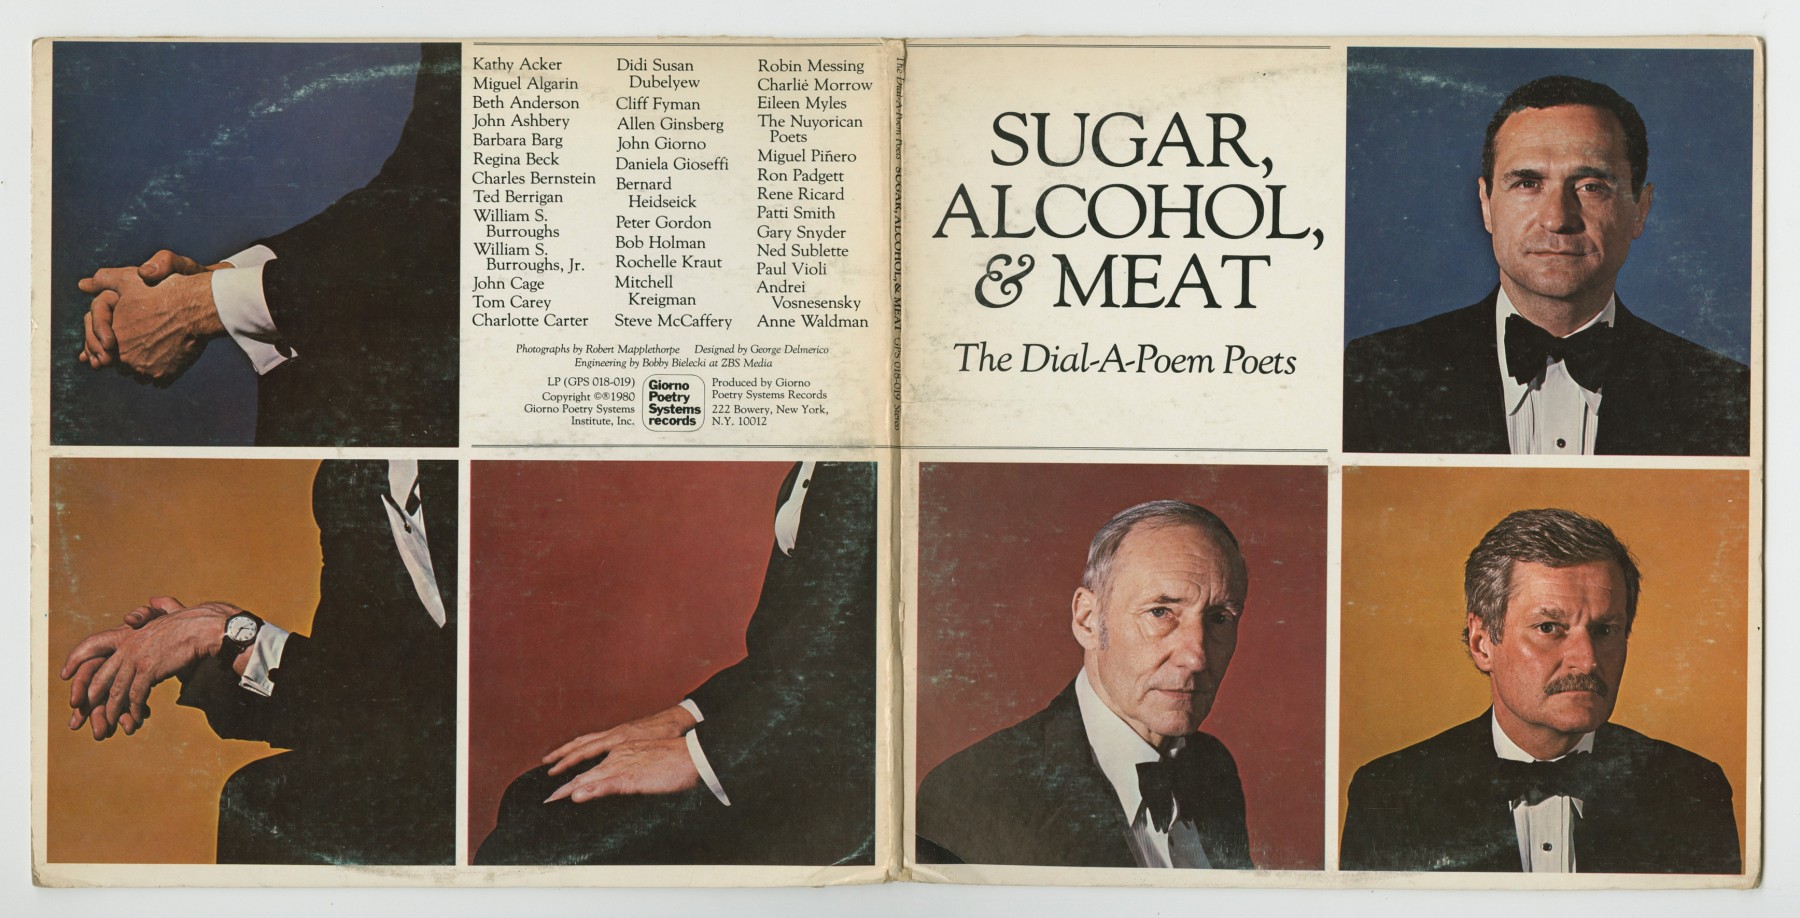 The Dial-A-Poem Poets: Sugar, Alcohol, &amp; Meat (1980), front and back covers